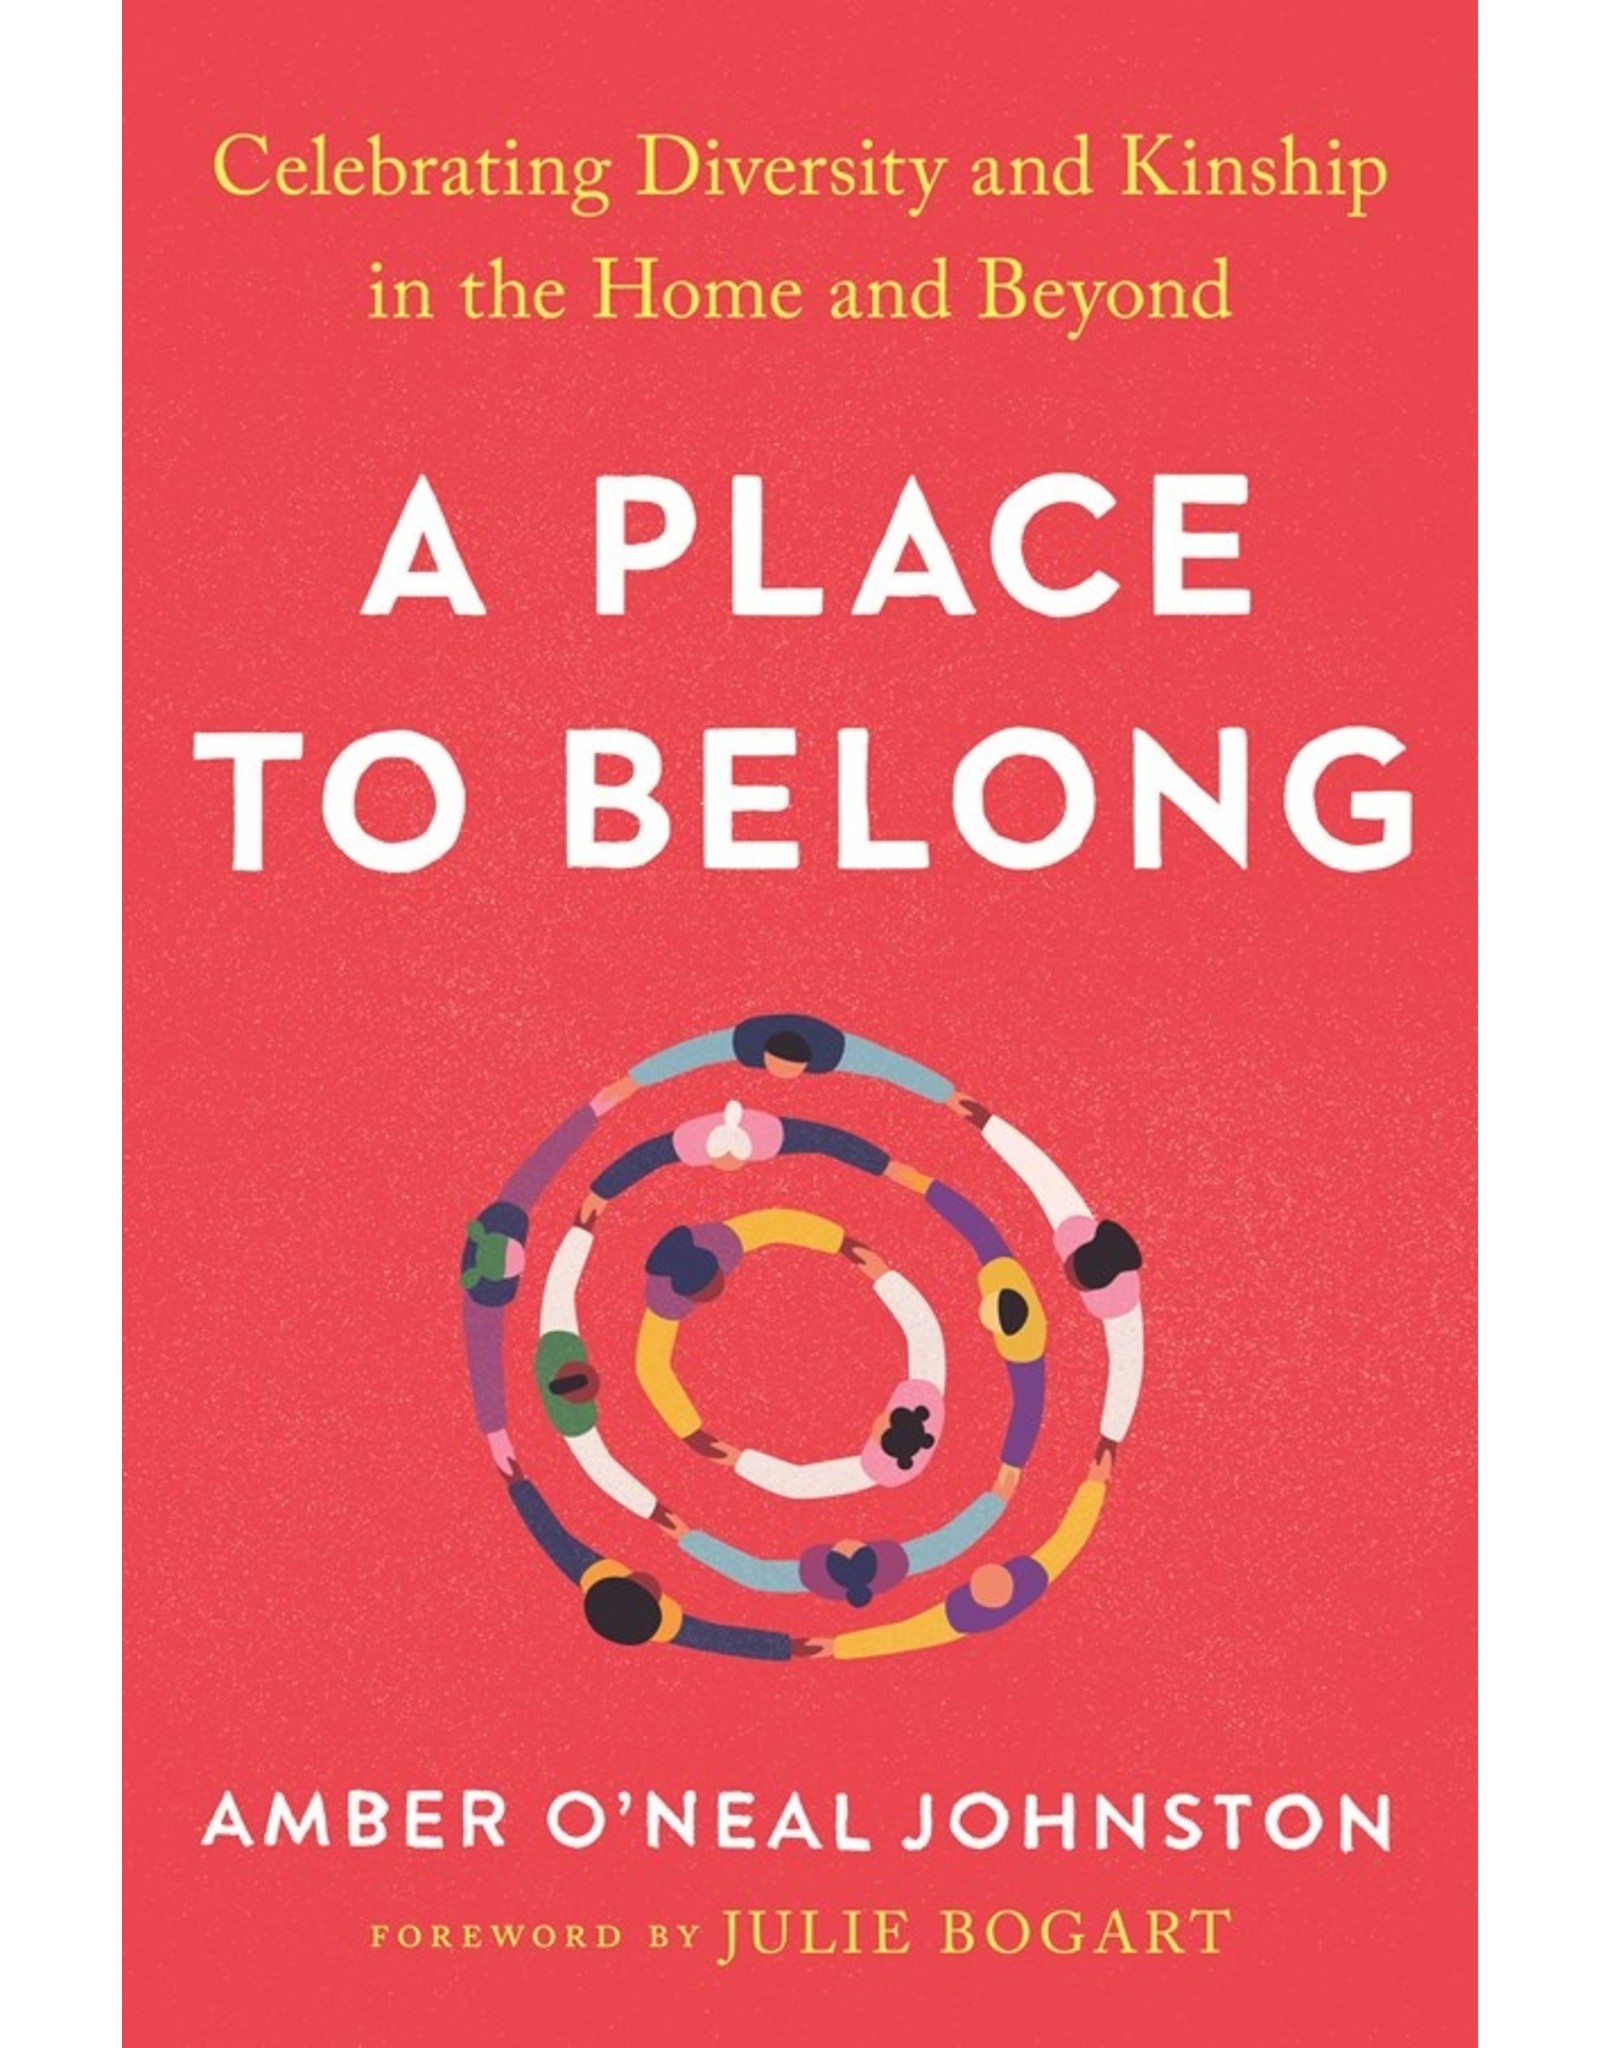 Books A Place to Belong : Celebrating Diversity and Kinship in the Home and Beyond by Amber O'Neal Johnston